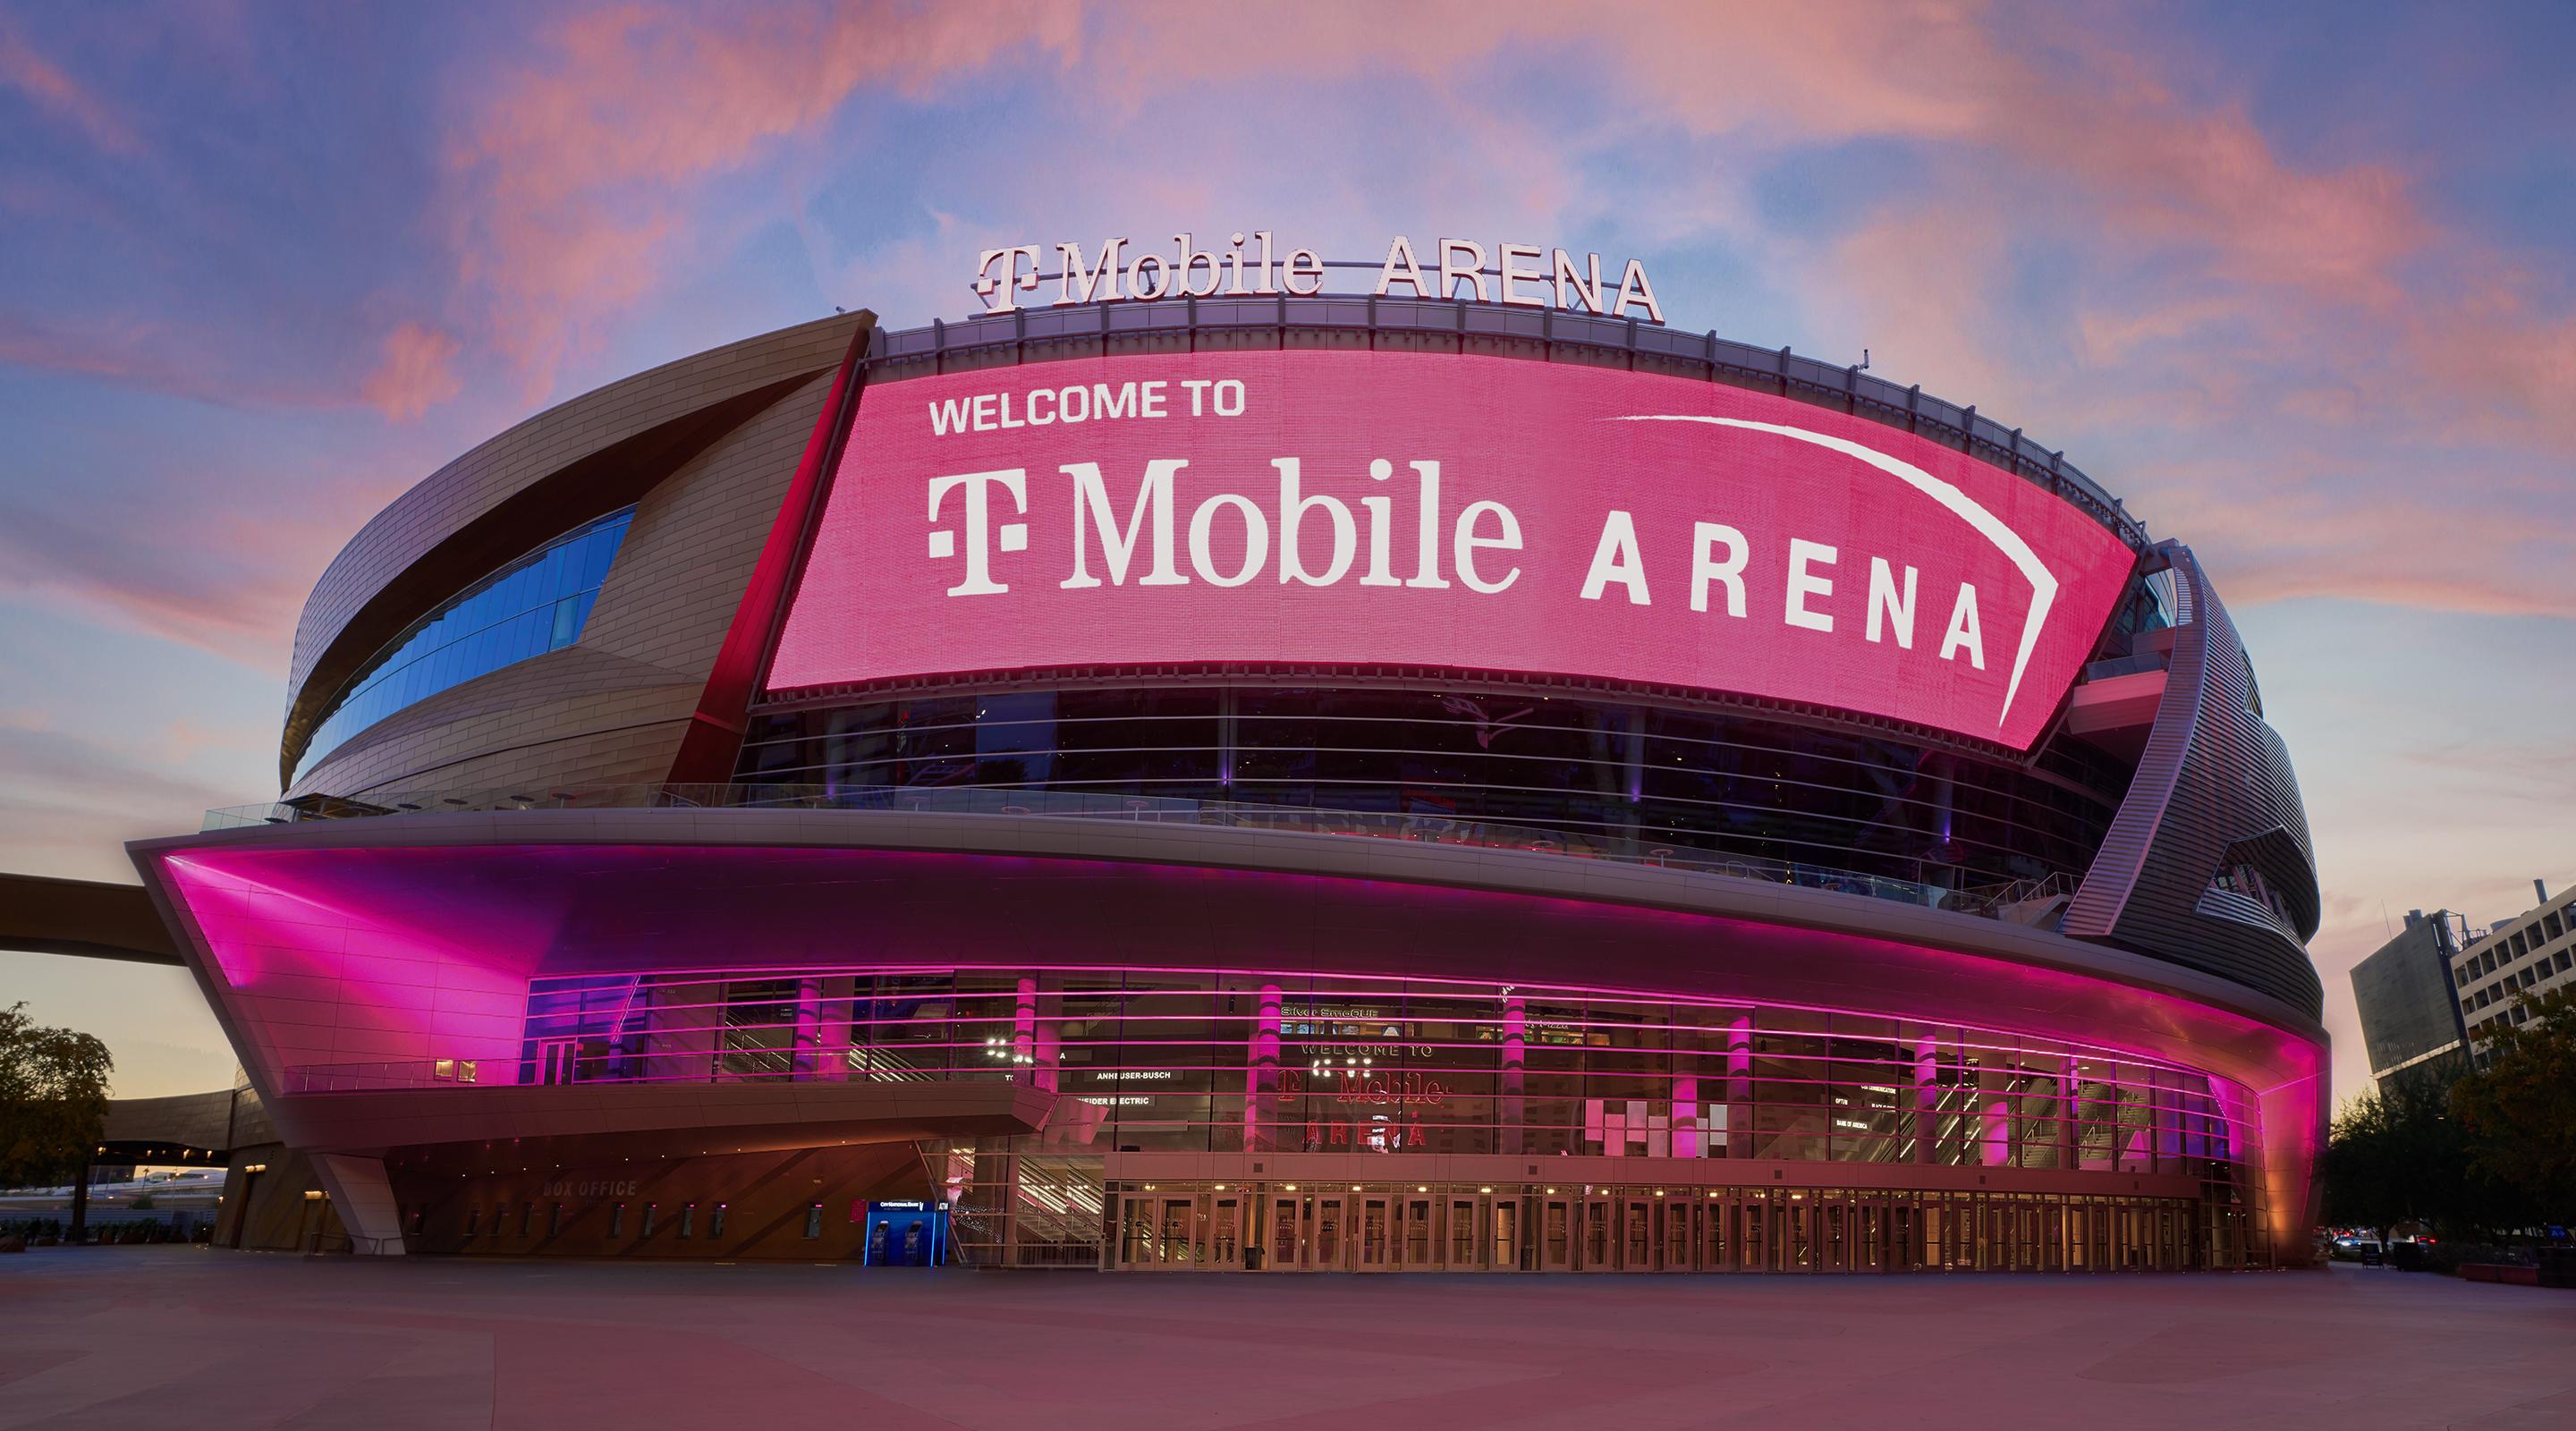 T-Mobile Arena, Las Vegas’ hottest sports and entertainment venue located just west of the famed Las Vegas Strip.